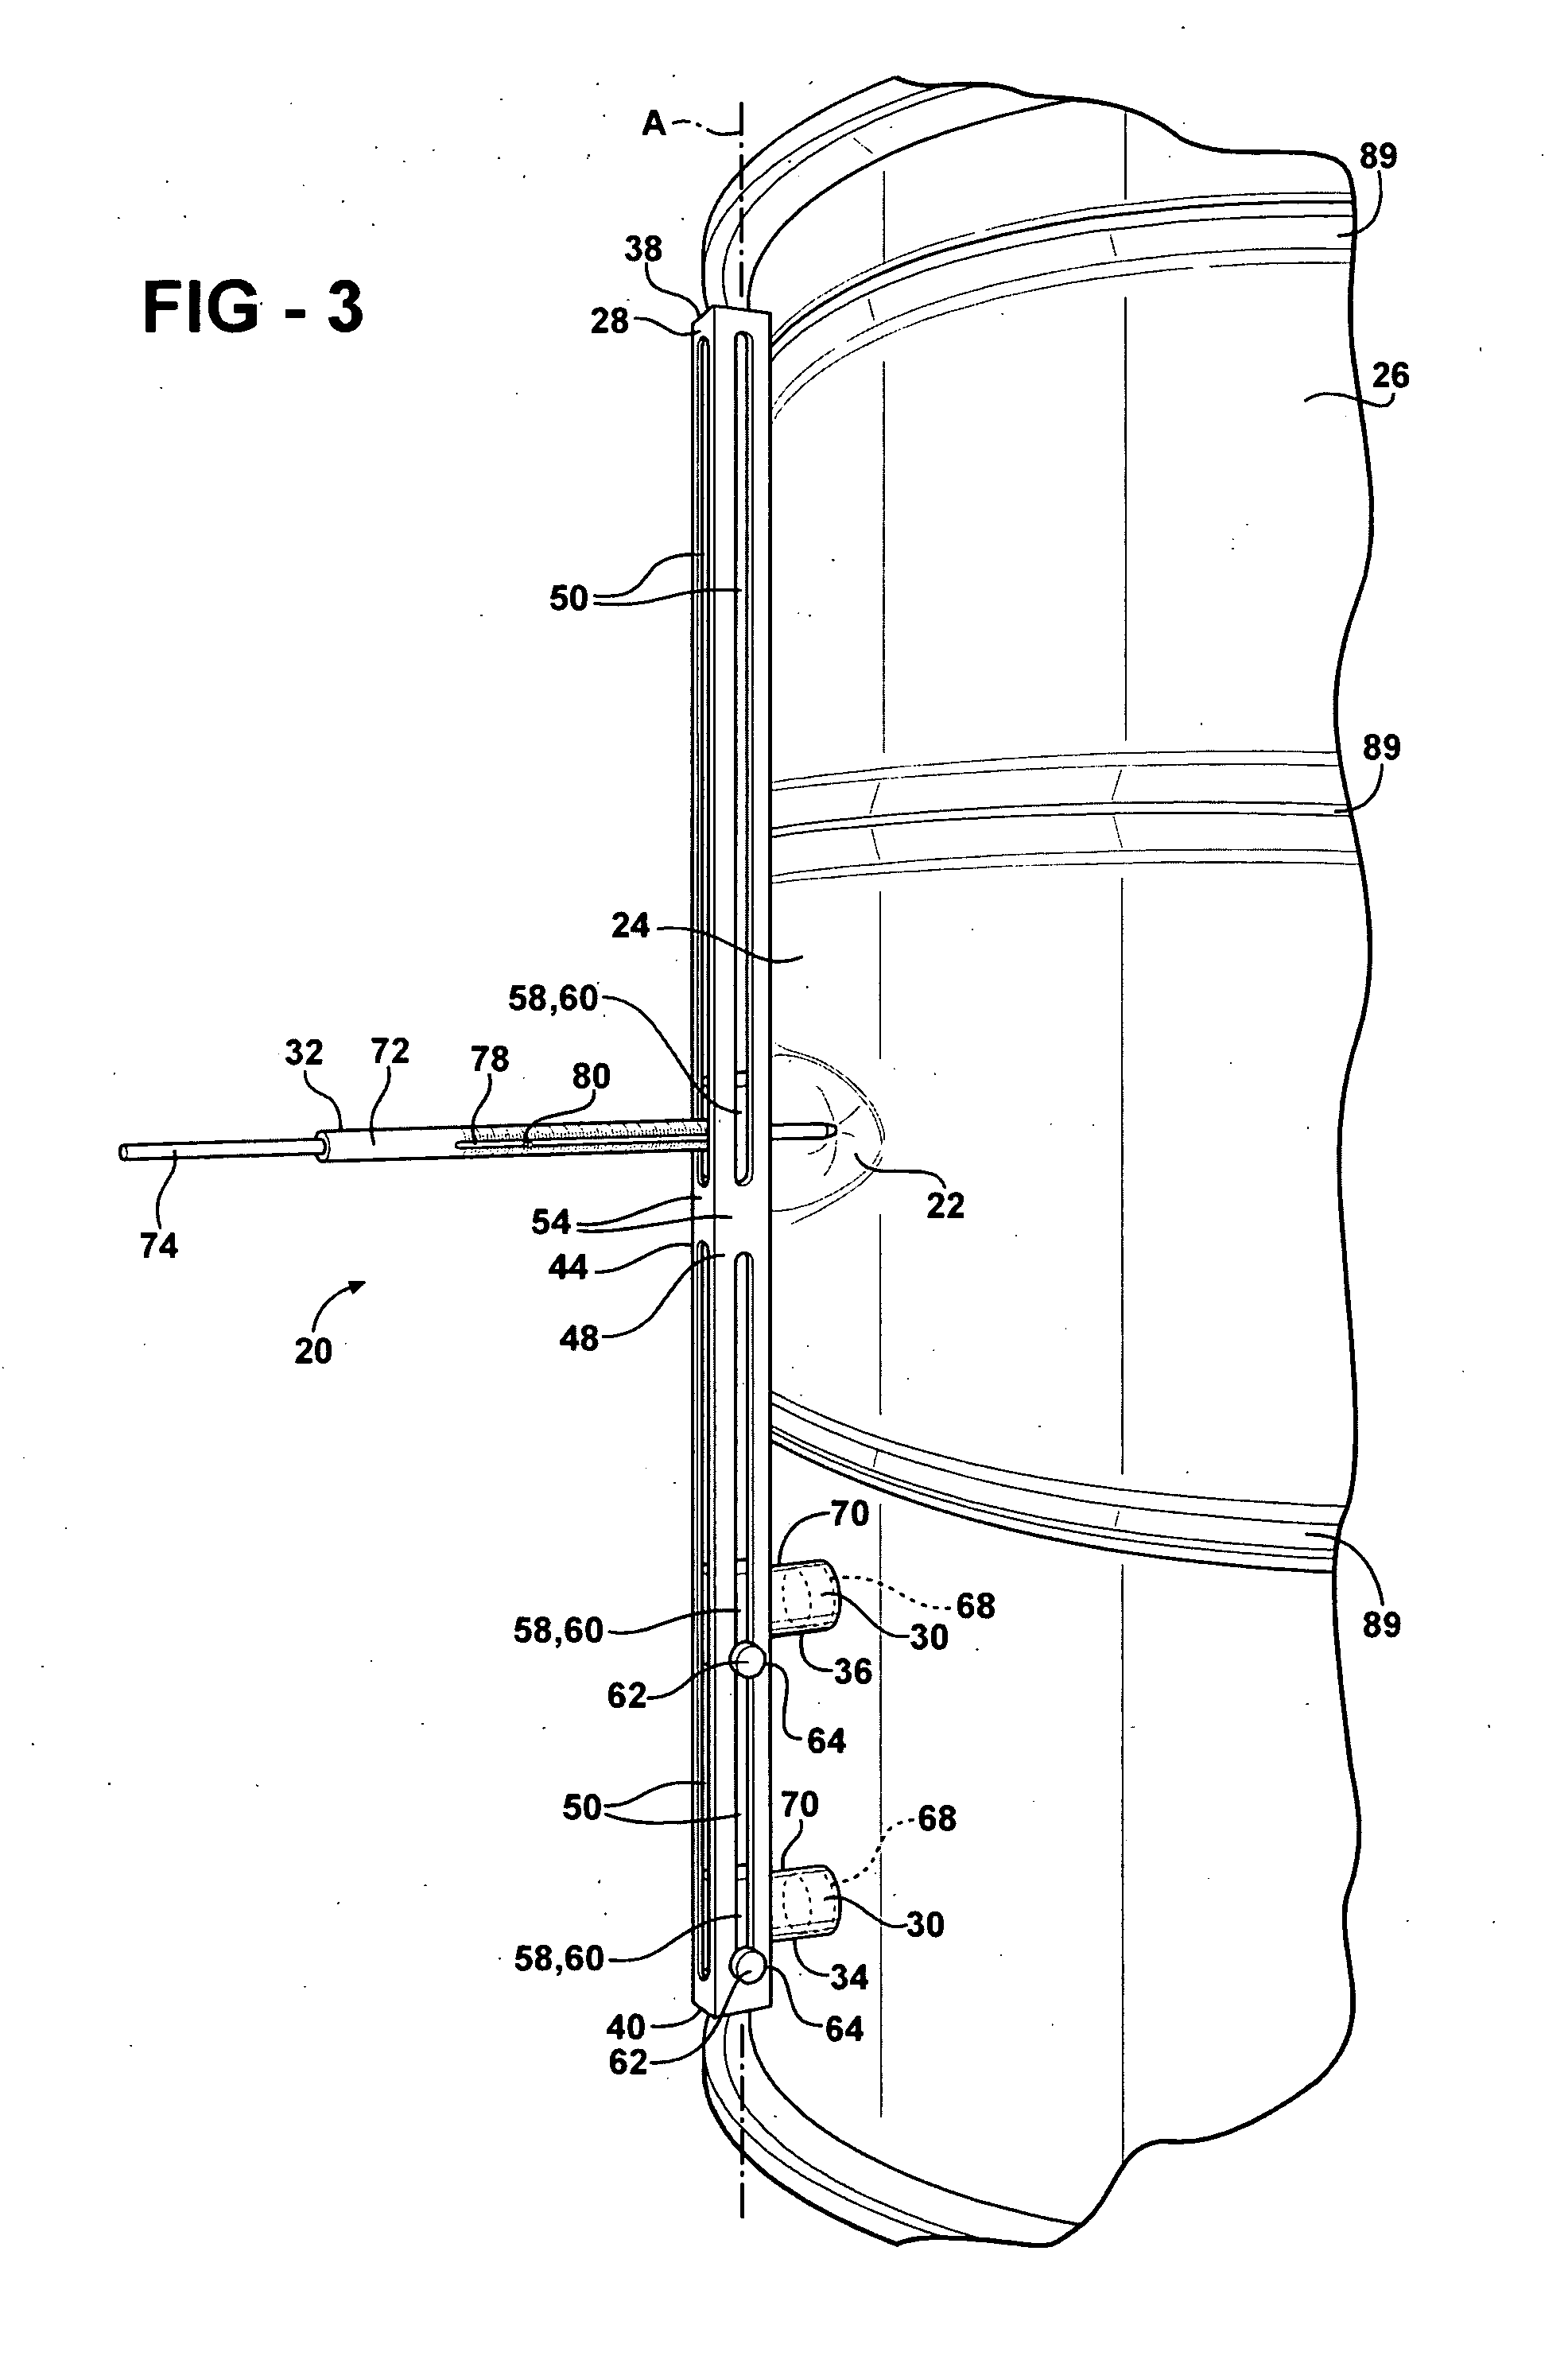 Method Of Measuring Dents And Method Of Classifying Dents